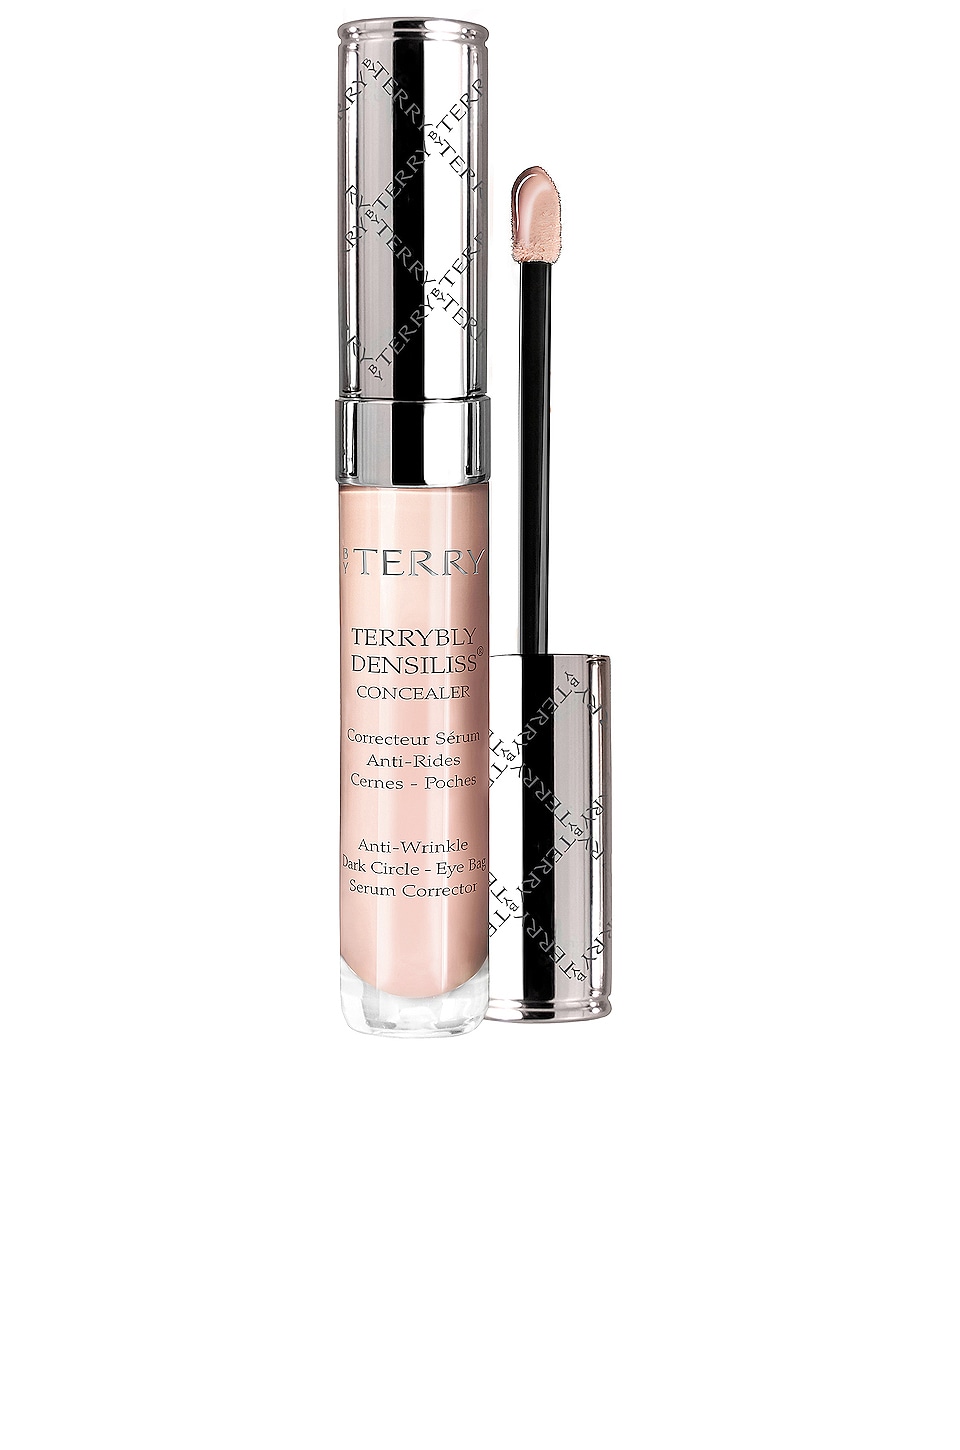 Консилер By Terry Terrybly Densiliss, цвет Medium Peach by terry консилер terrybly densiliss concealer оттенок 3 natural beige